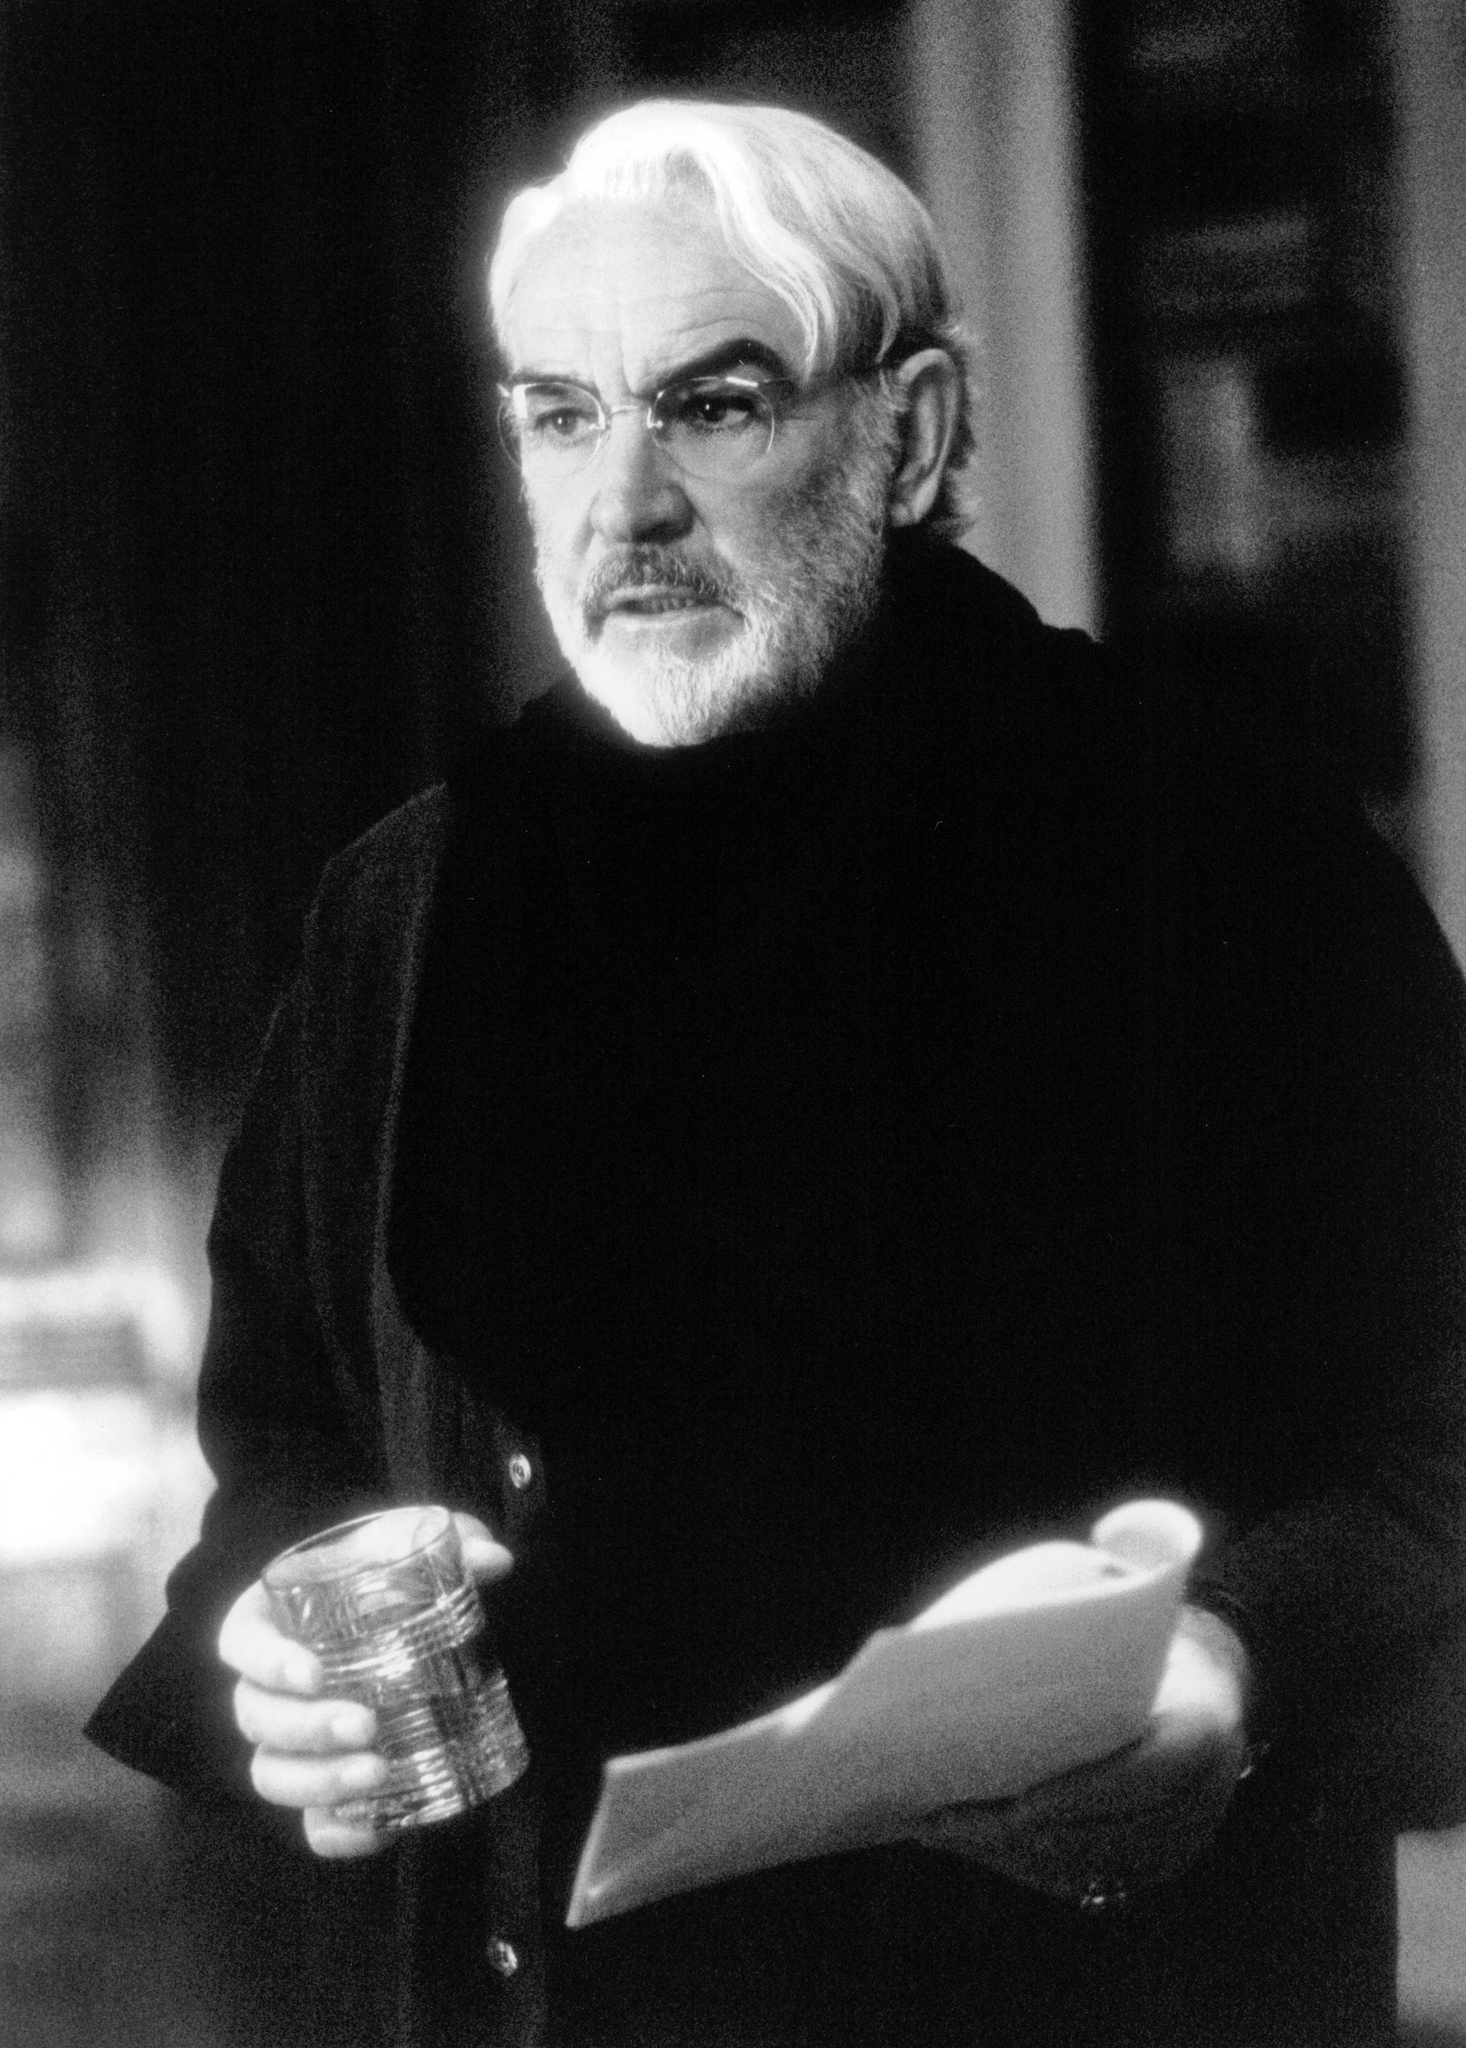 Still of Sean Connery in Finding Forrester (2000)